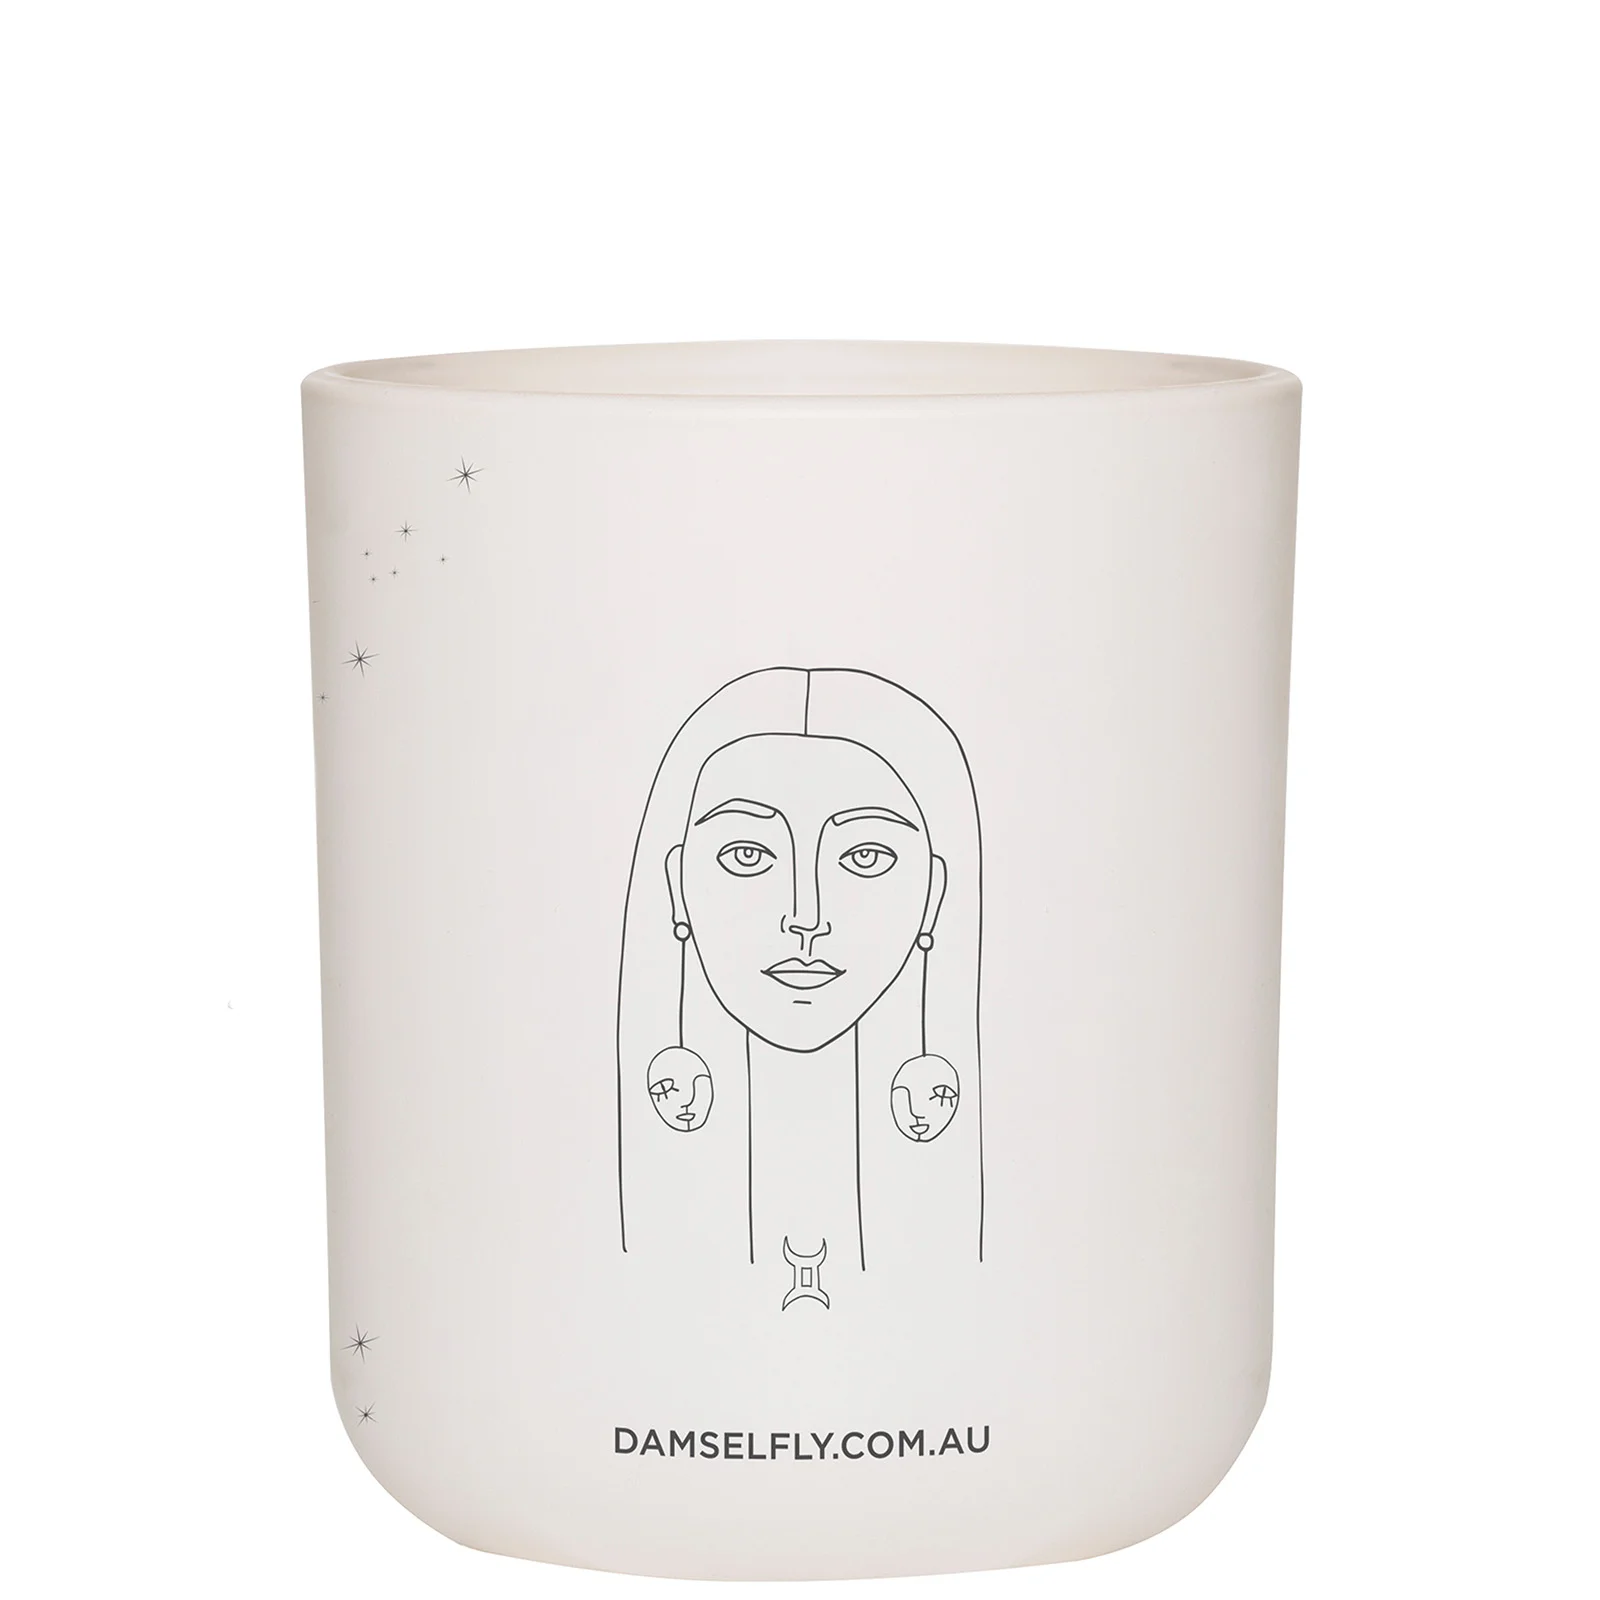 Damselfly Gemini Scented Candle - 300g Image 1